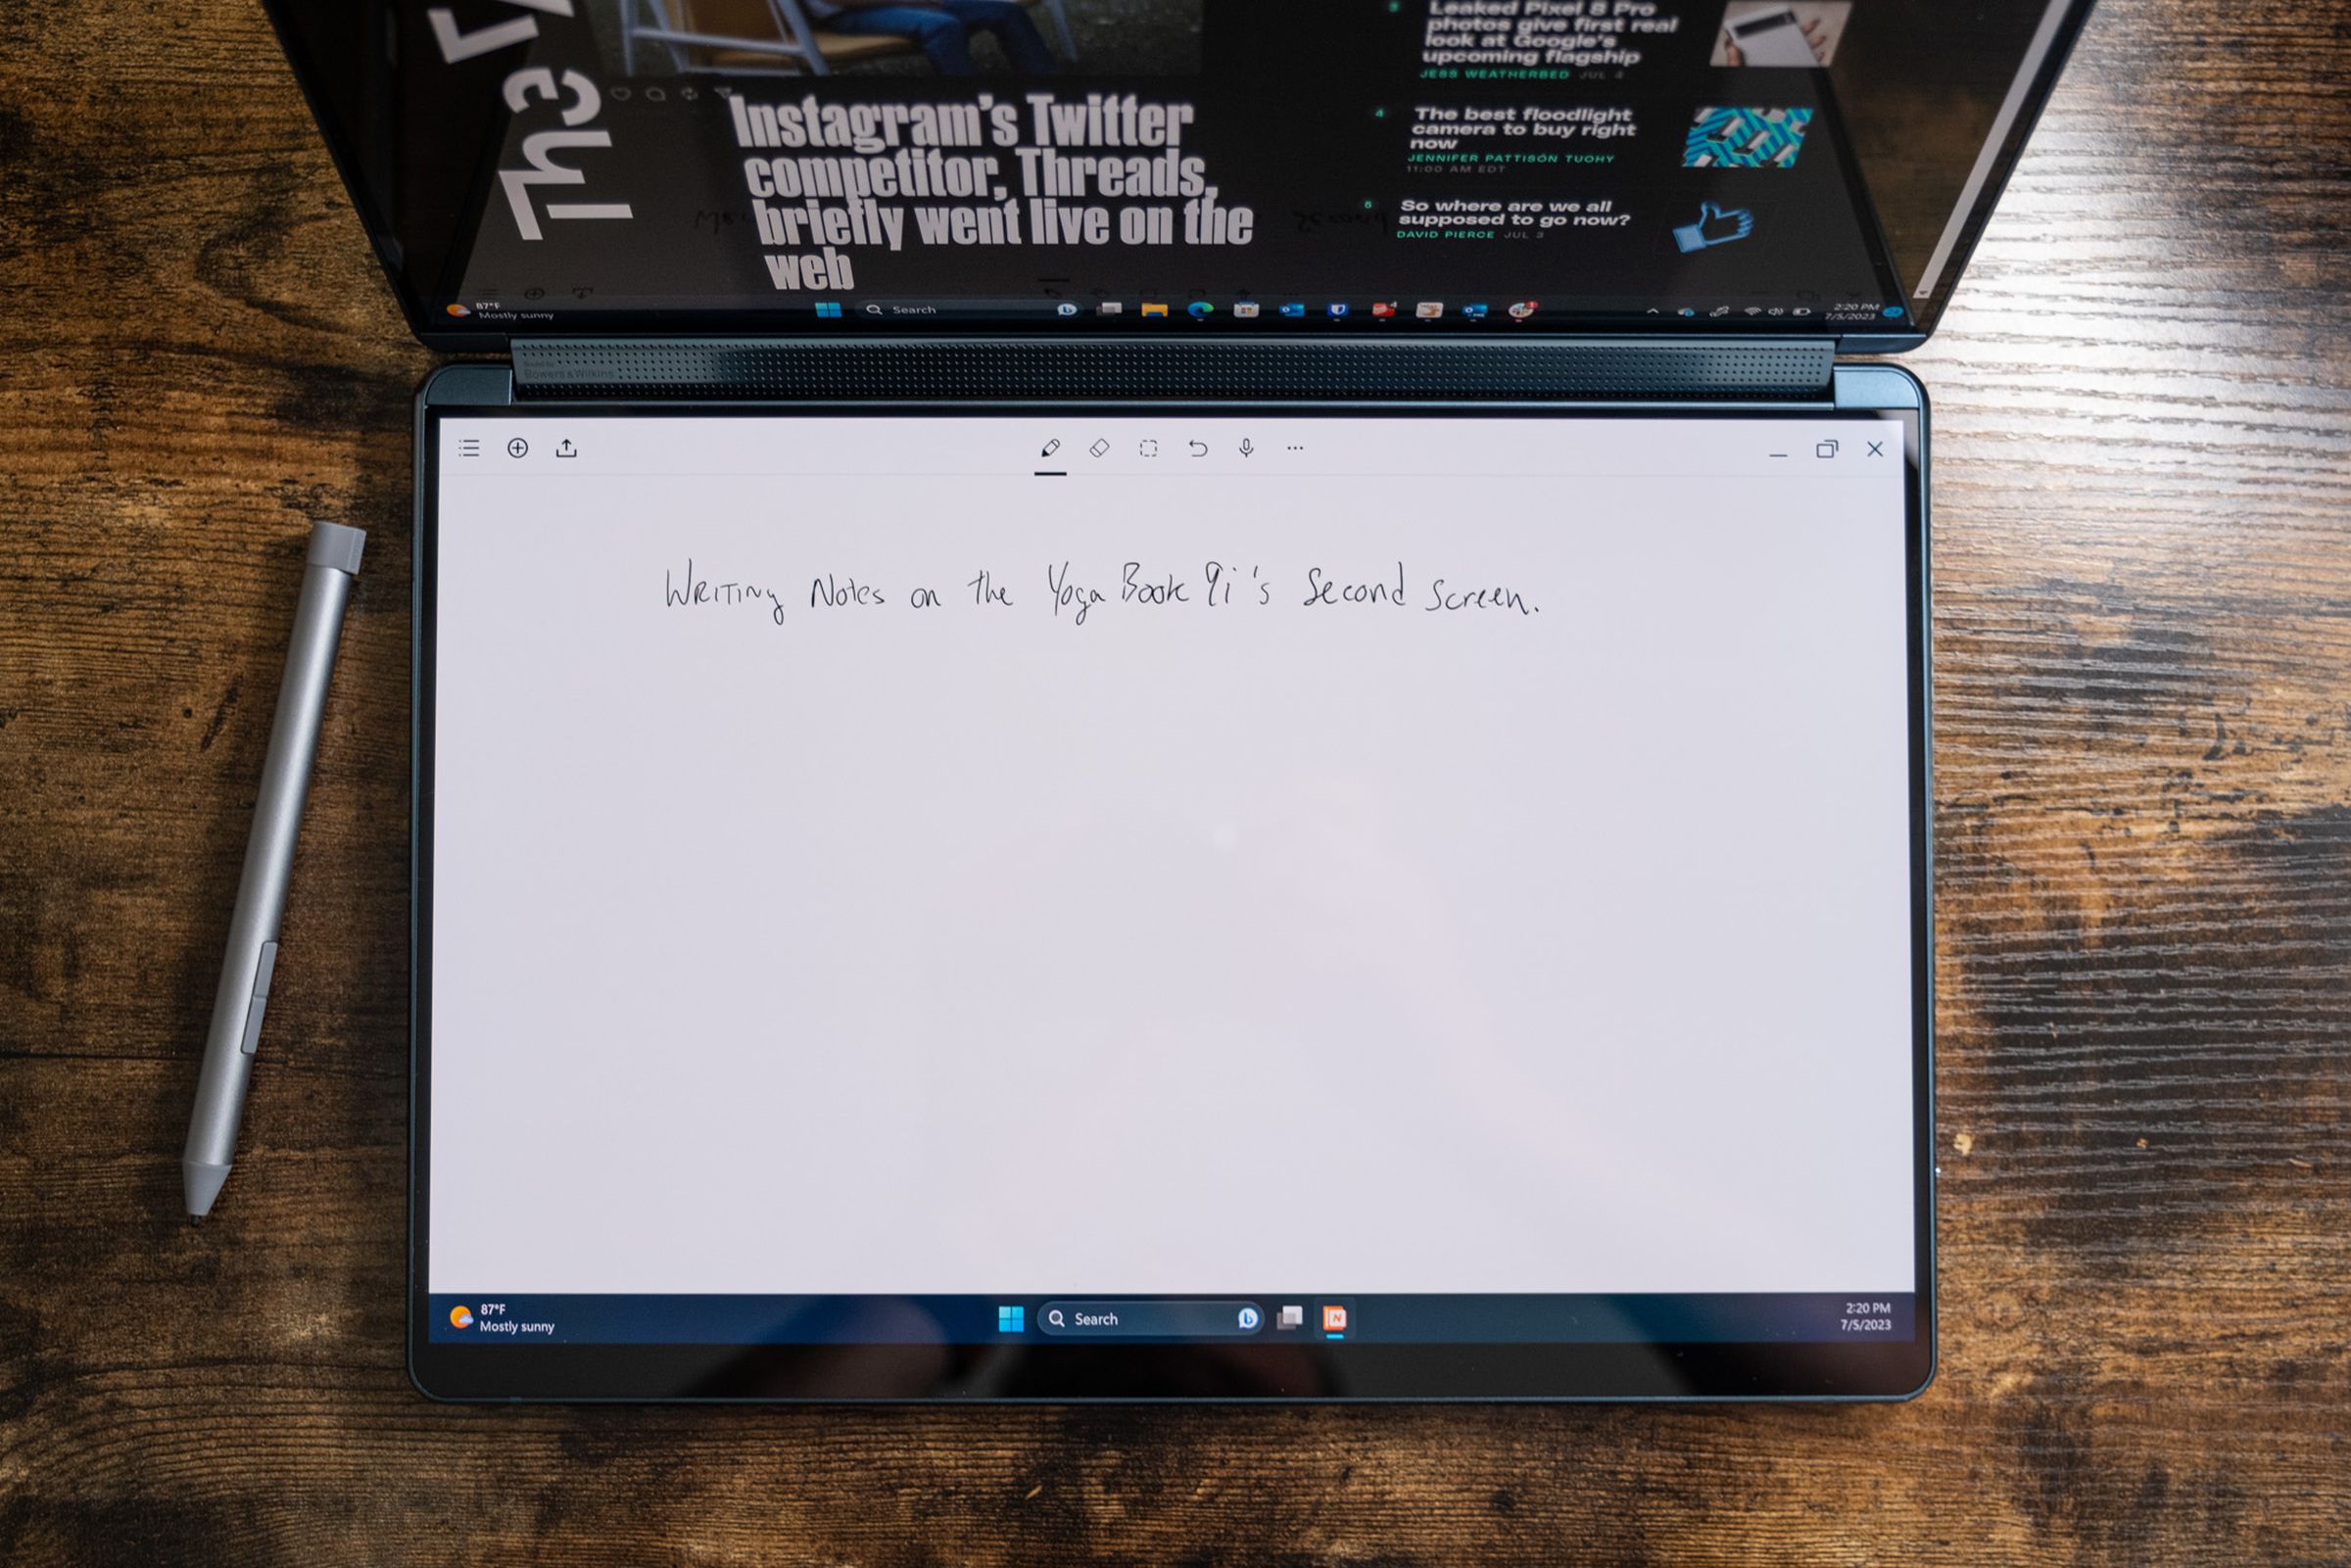 Writing notes on the Yoga Book 9i’s bottom screen with the included stylus.